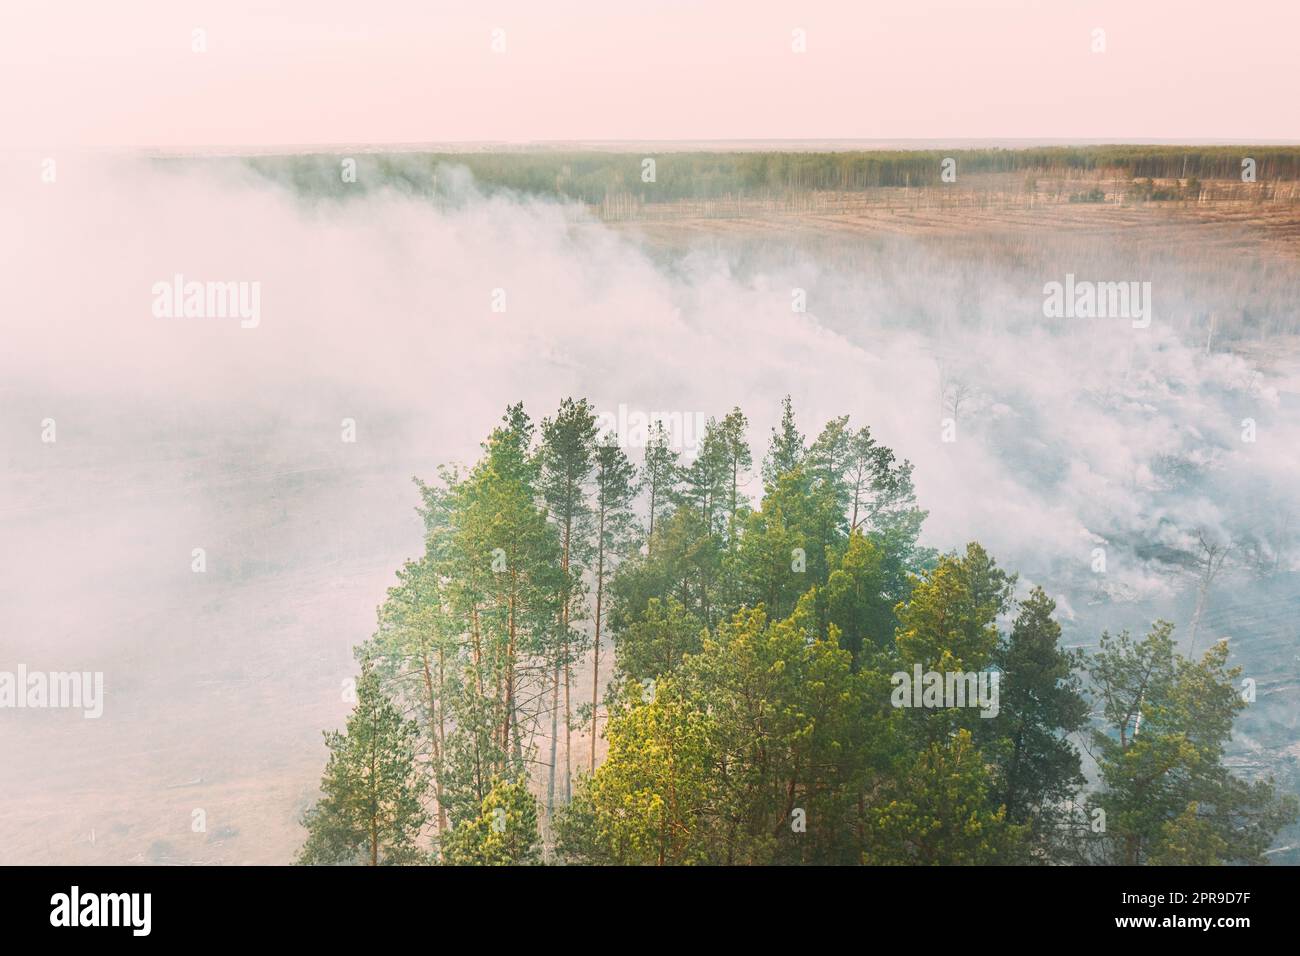 Aerial View. Spring Dry Grass Burns During Drought Hot Weather. Bush Fire And Smoke In Pine Forest. Wild Open Fire Destroys Grass. Nature In Danger. Ecological Problem Air Pollution Stock Photo